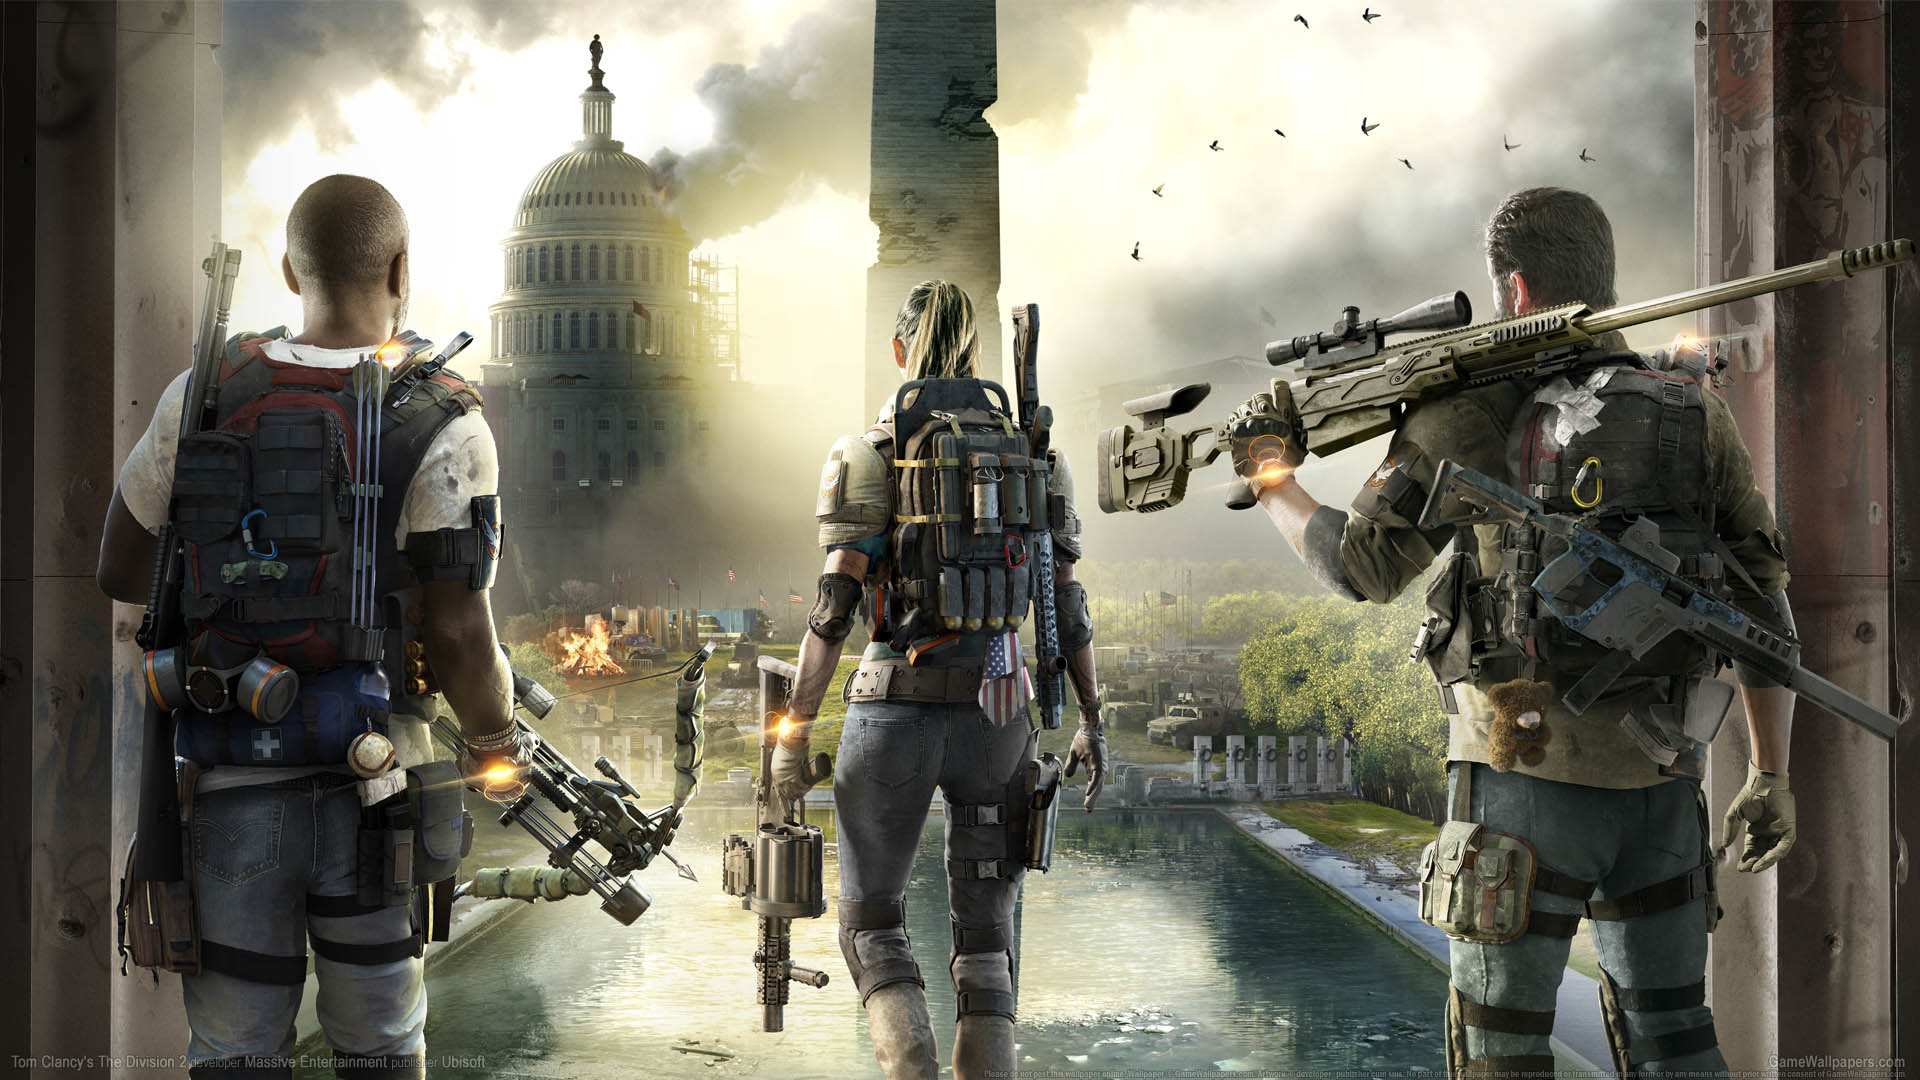 Tom Clancys The Division 2 wallpaper 01 1920x1080 1920x1080